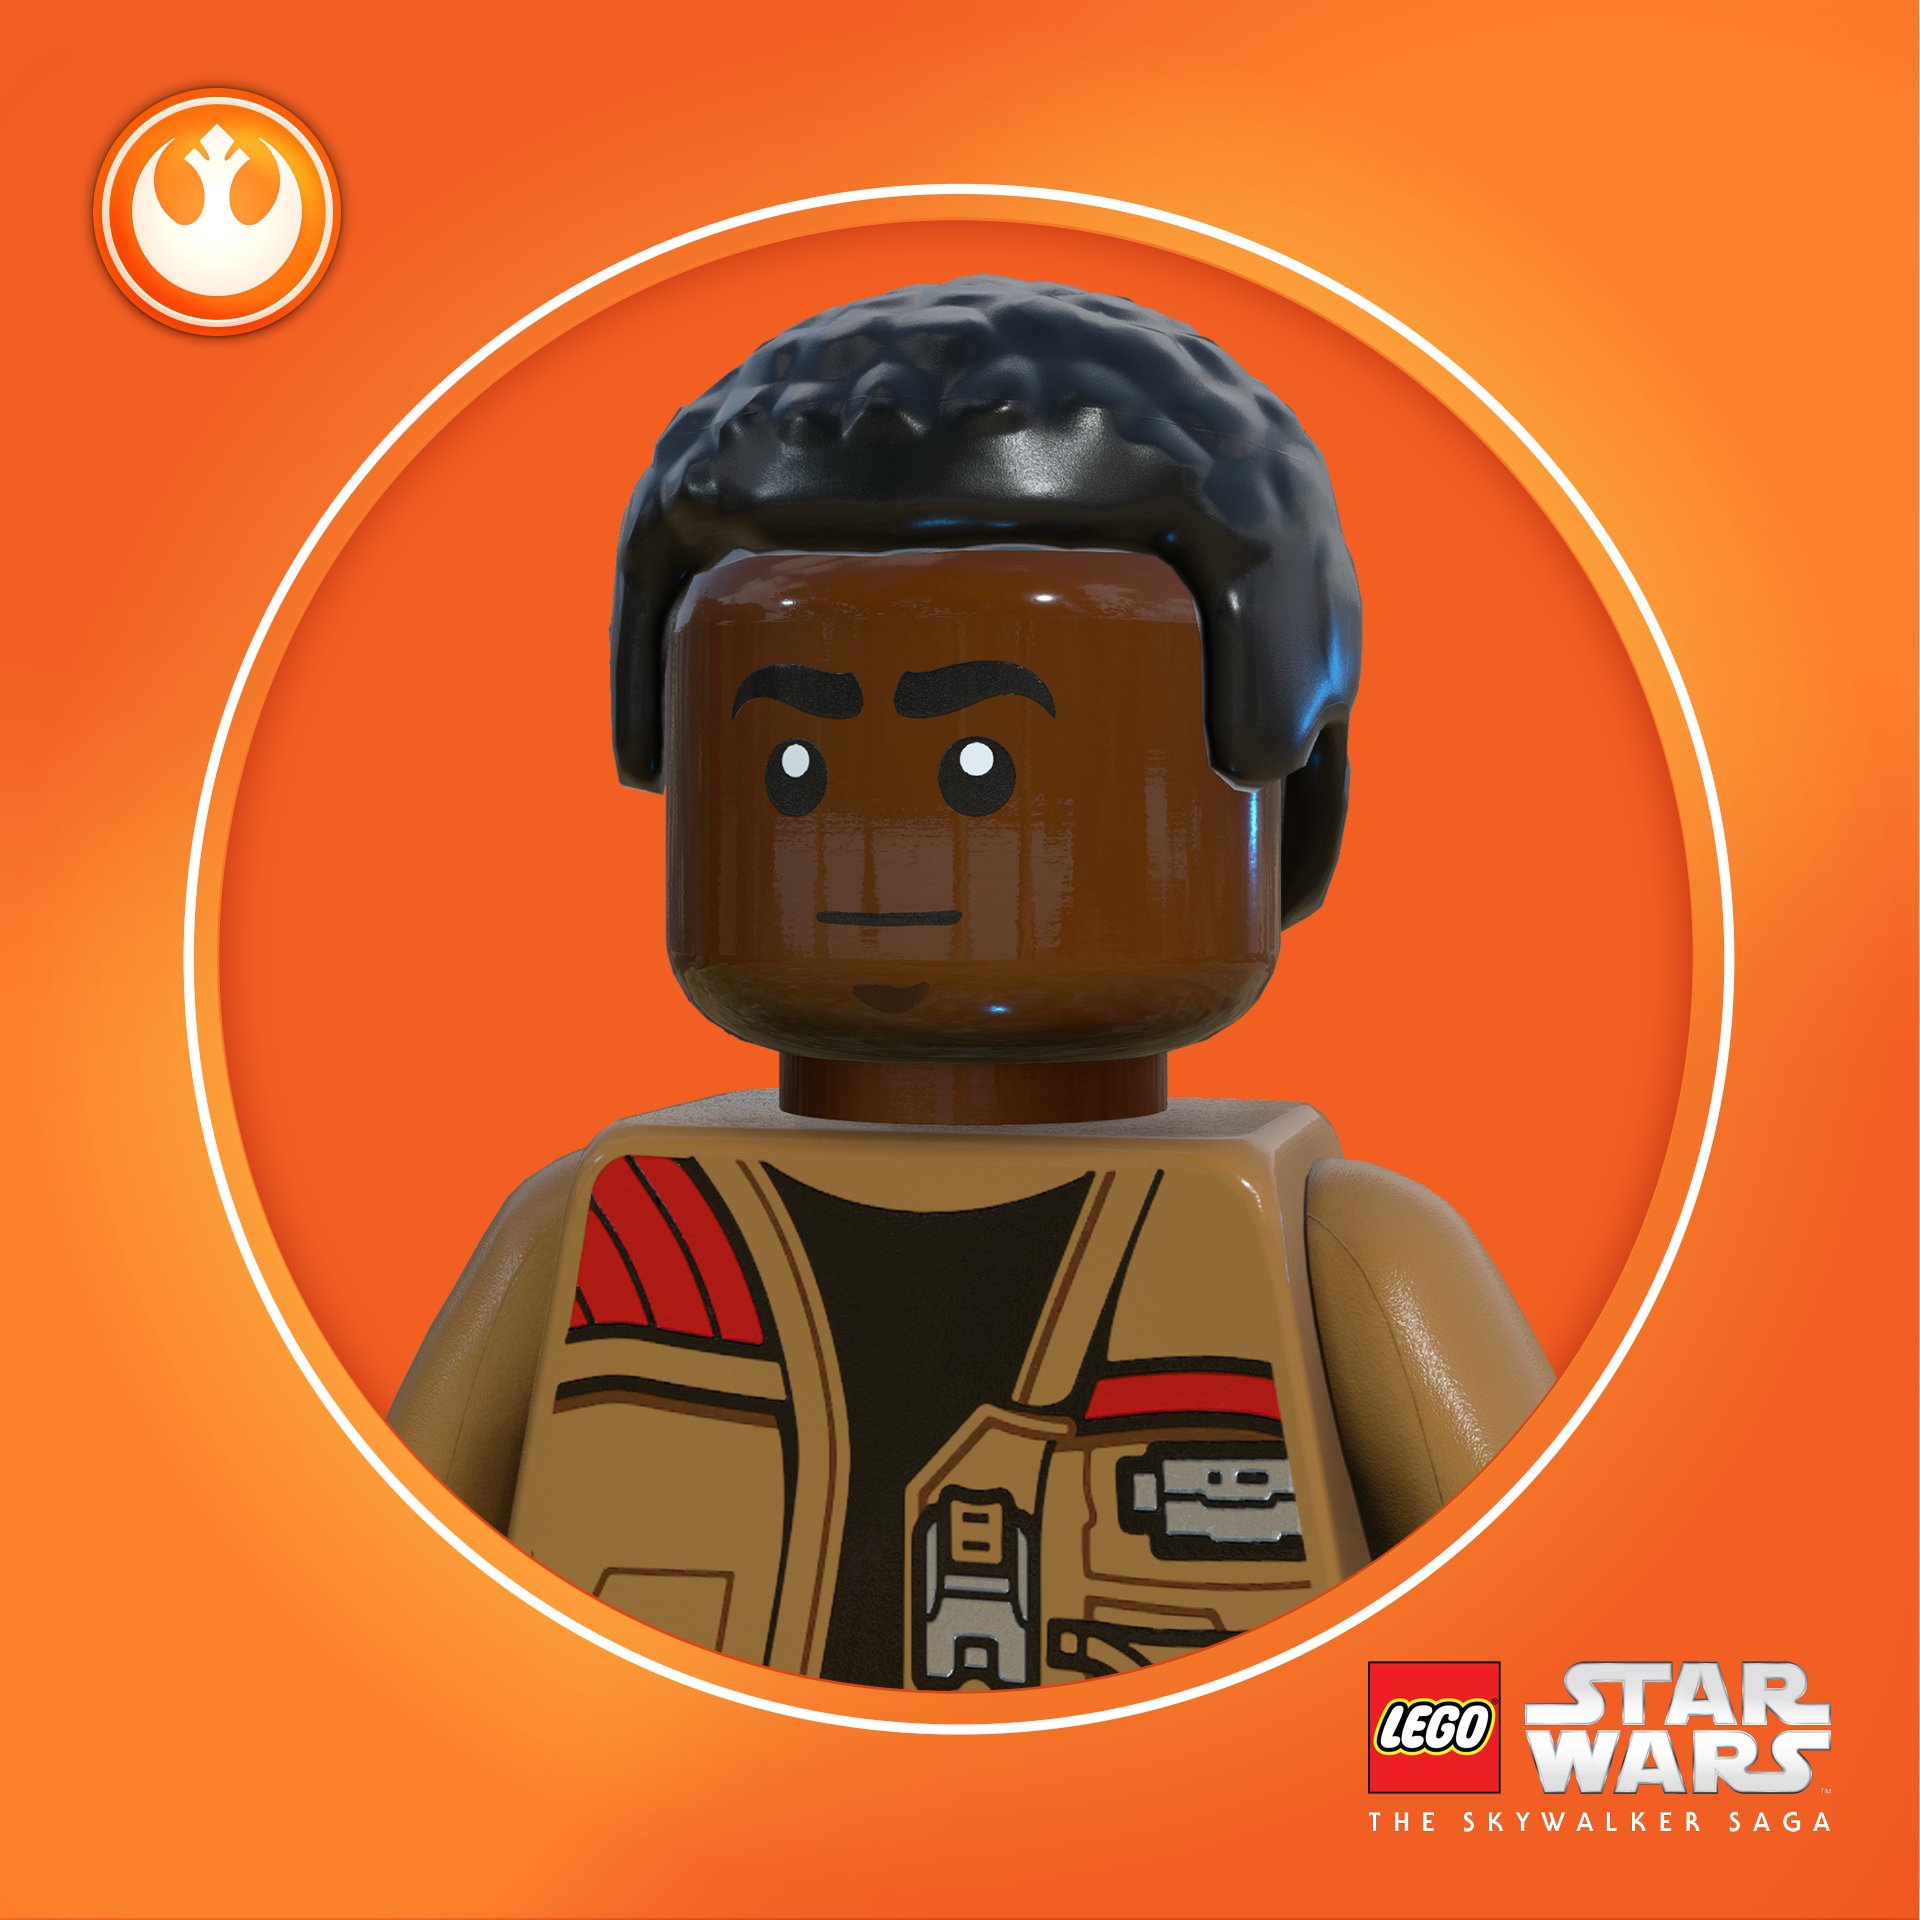 How To Get a Lego Star Wars Profile